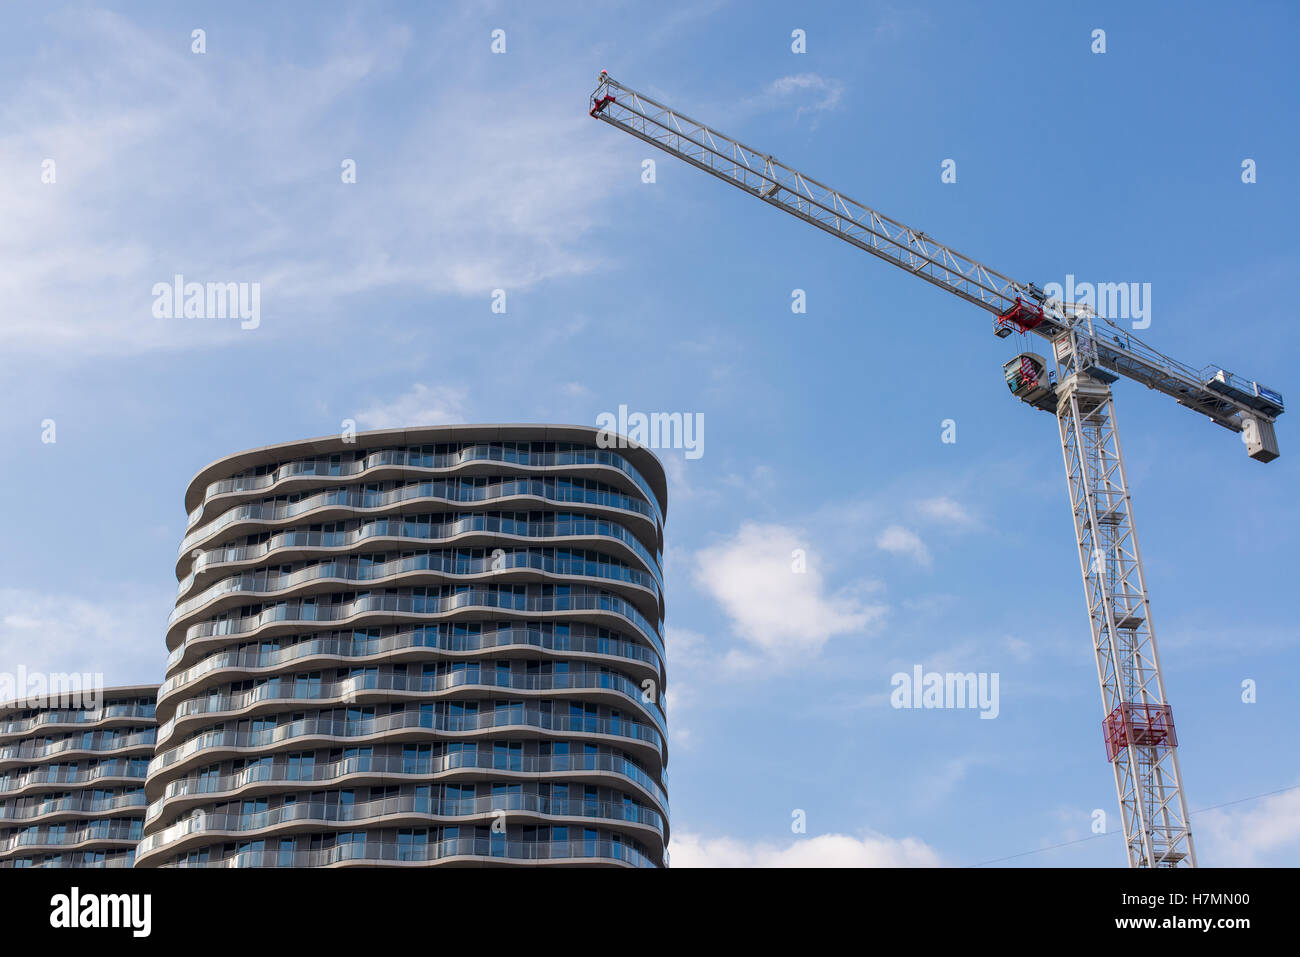 Big construction crane with two high-rise modern apartment buildings next to it Stock Photo